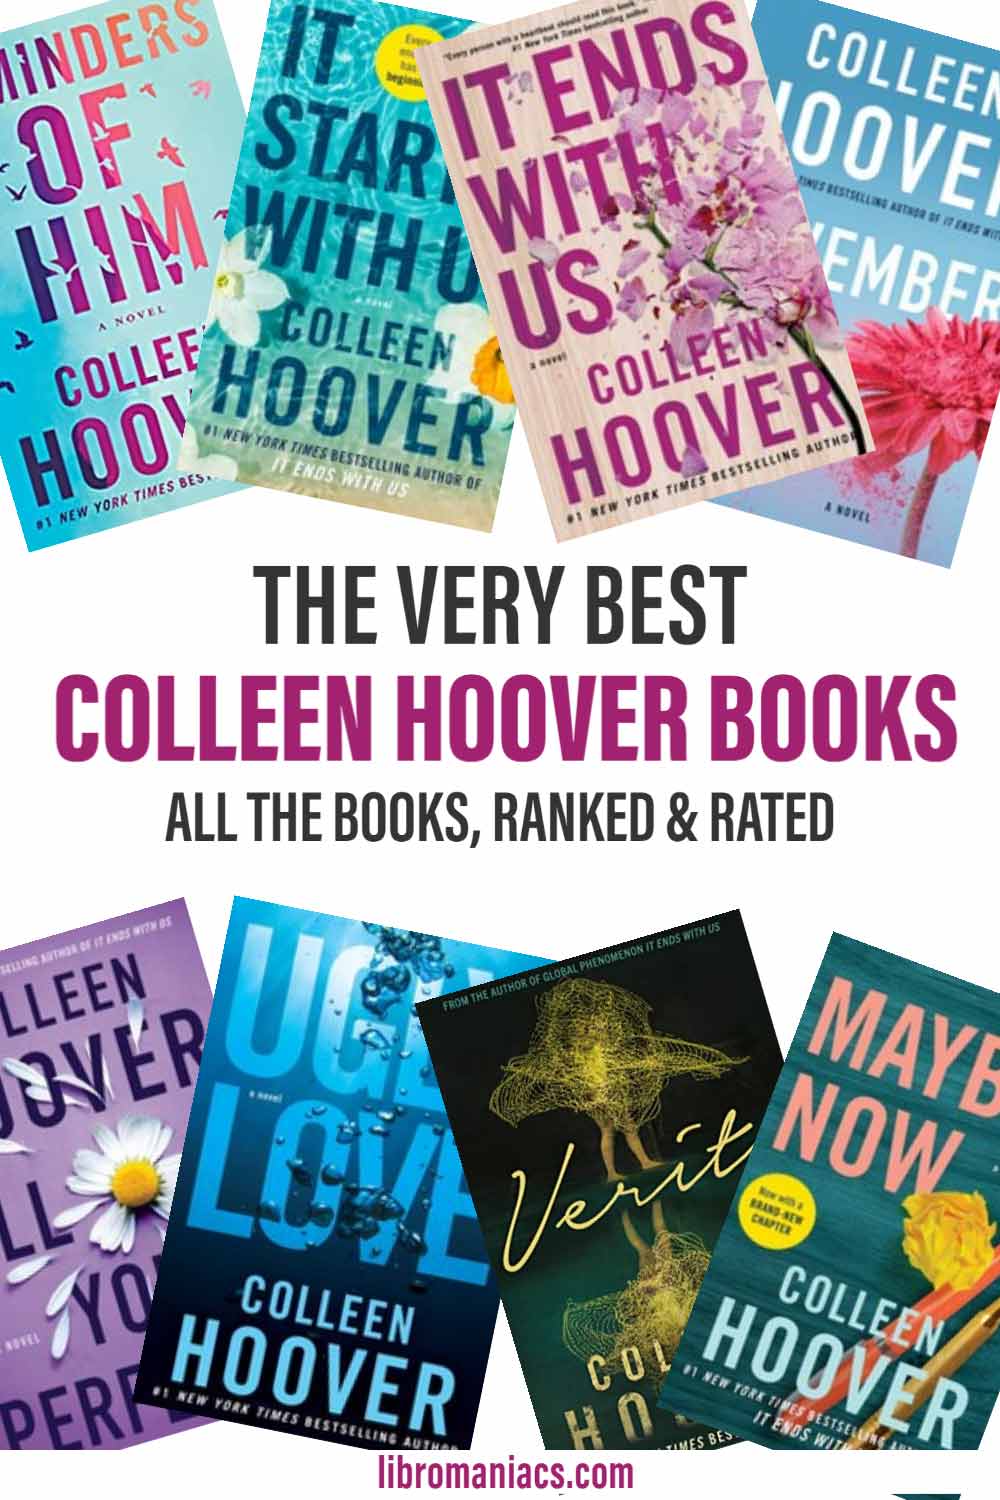 The best Colleen Hoover books, all the books with book covers.